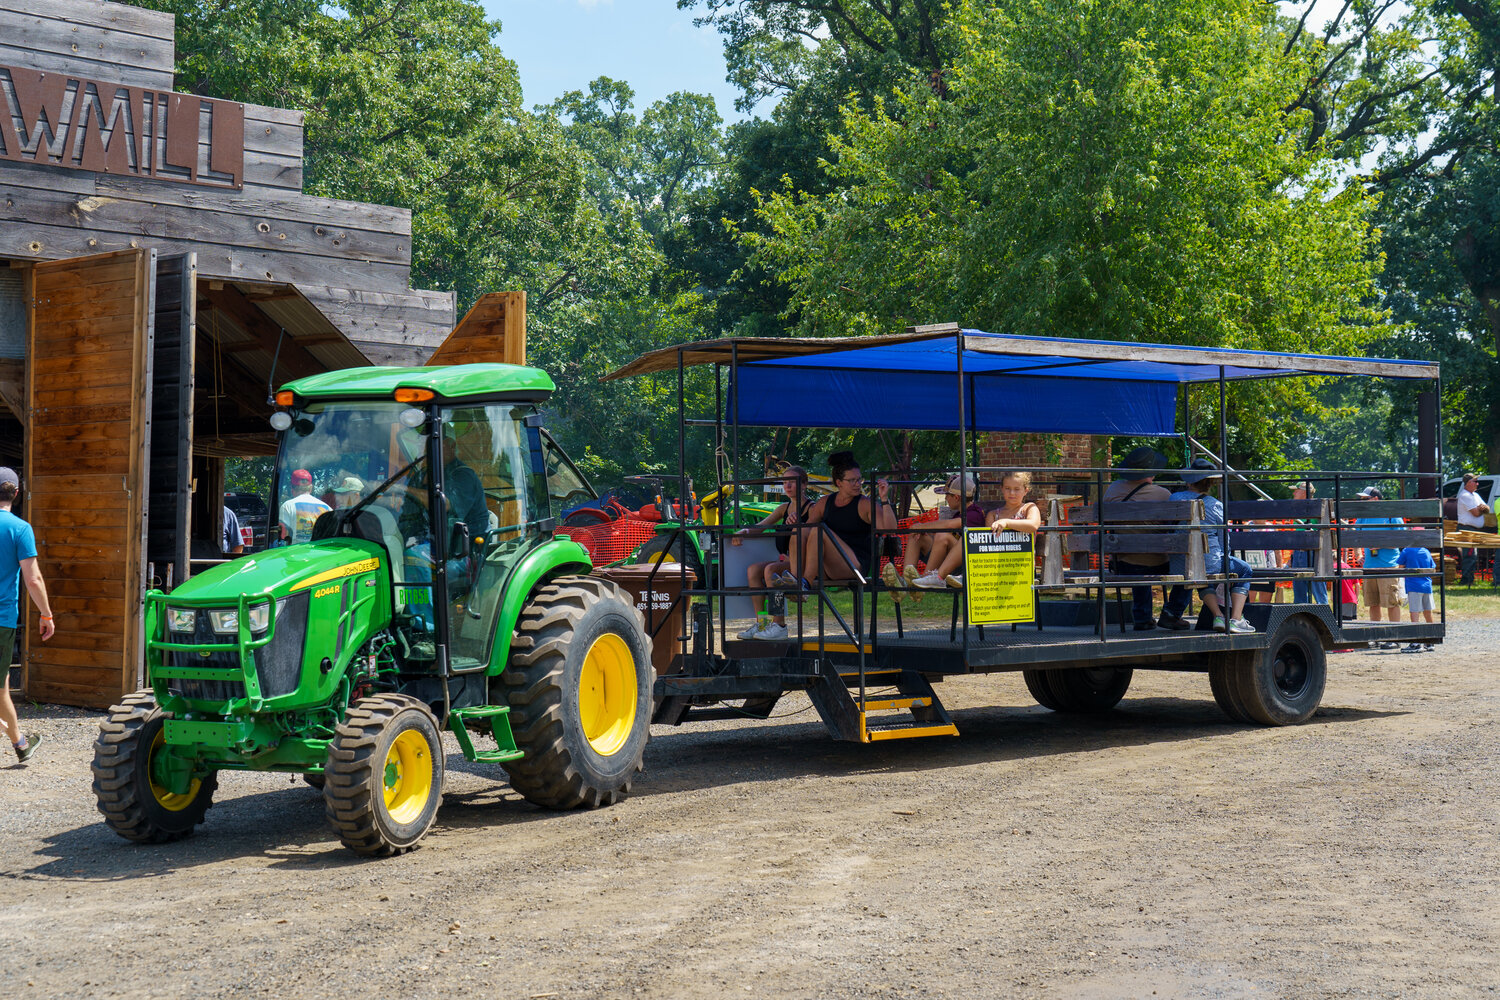 With the size of the property for the Little Log House show, the event organizers offered free tractor pulled wagon shuttles around the grounds.